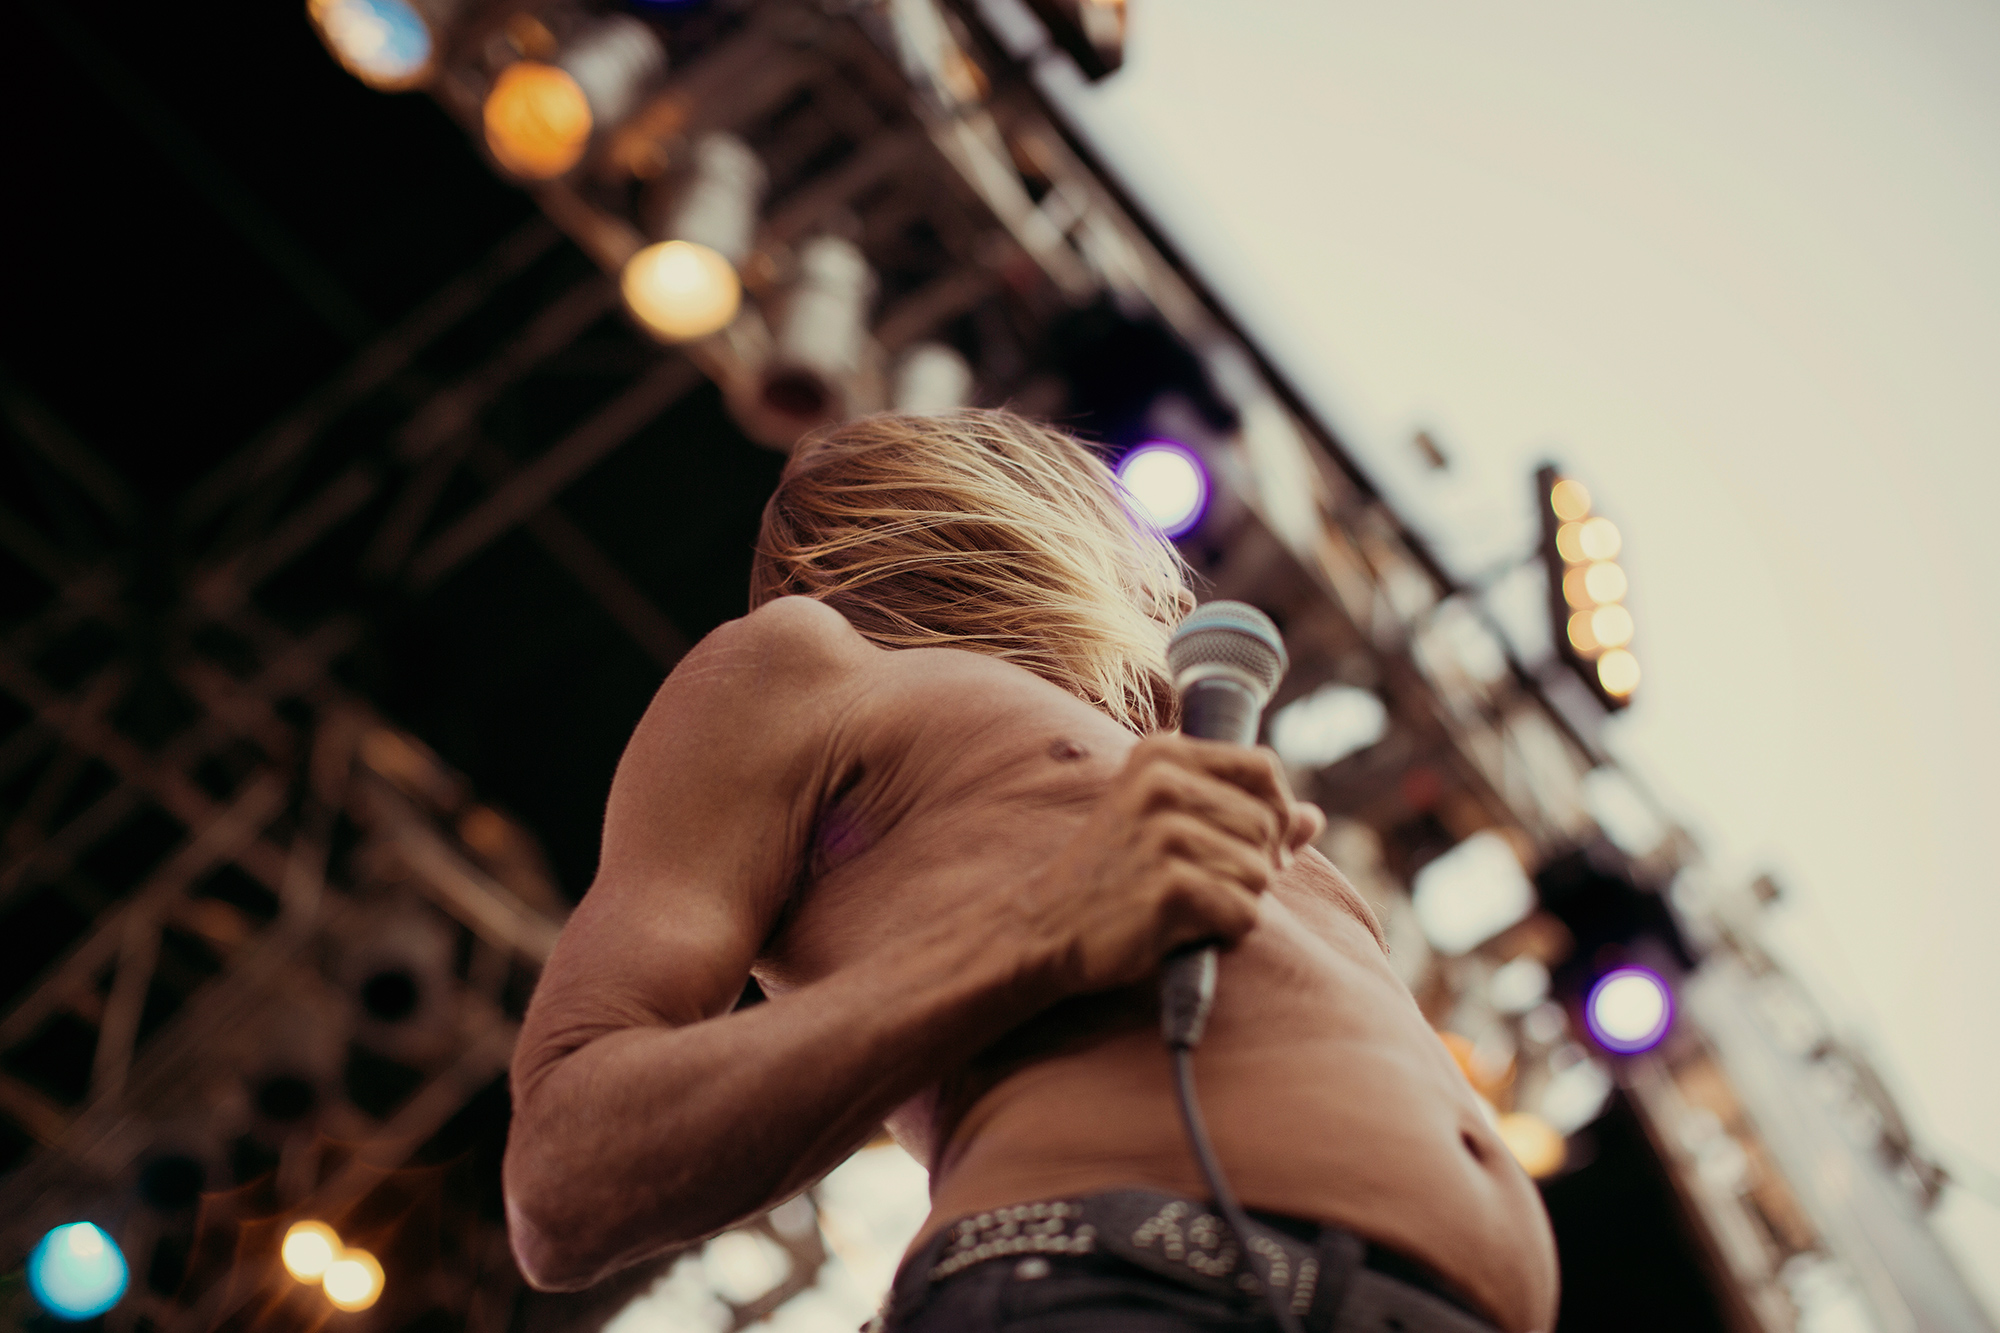 Iggy Pop, frontman of The Stooges, performs at Free Press Summer Fest music festival in Houston, Texas, photographed by Todd Spoth.